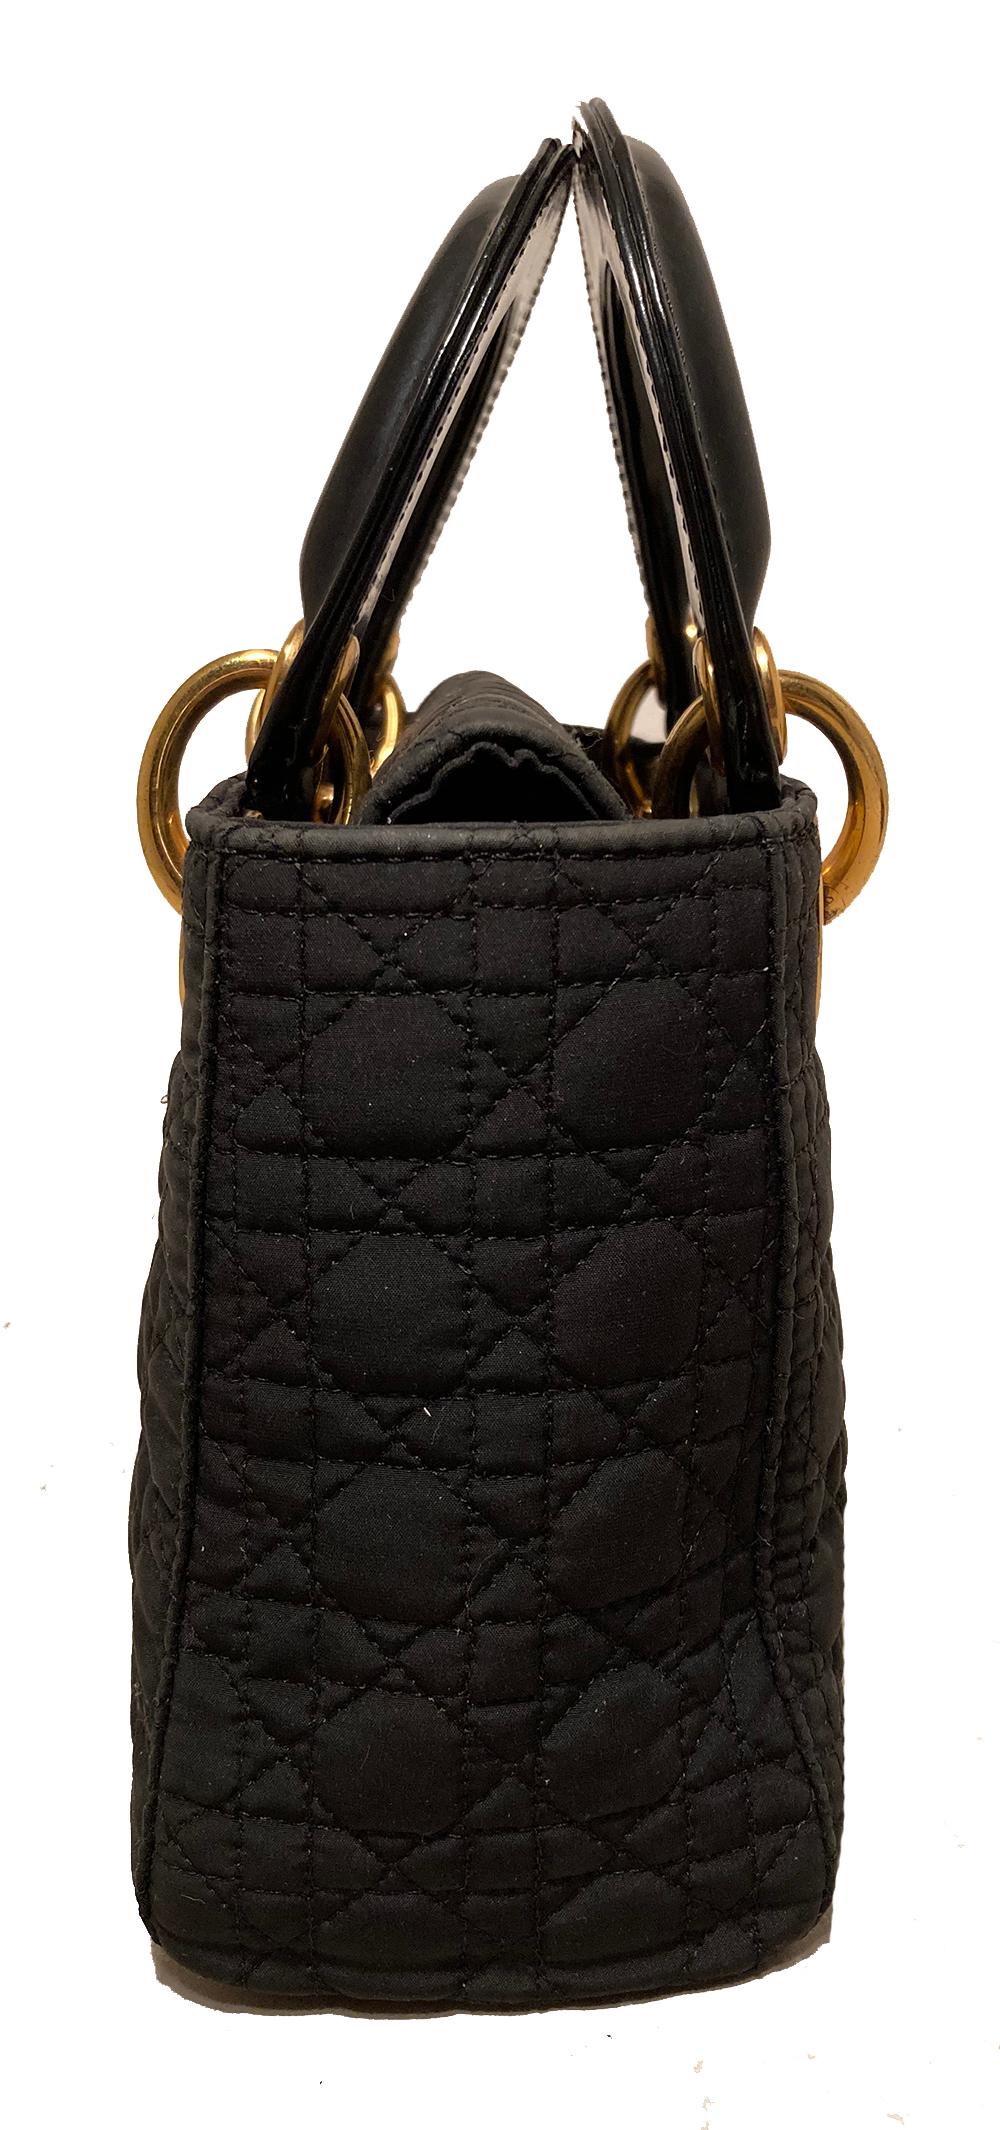 Dior Vintage Mini Lady Dior Black Nylon Cannage Quilted Bag in very good condition. Black nylon cannage quilted body trimmed with gold hardware and black leather handles. Top flap snap closure opens to a red nylon interior that holds one side zipped